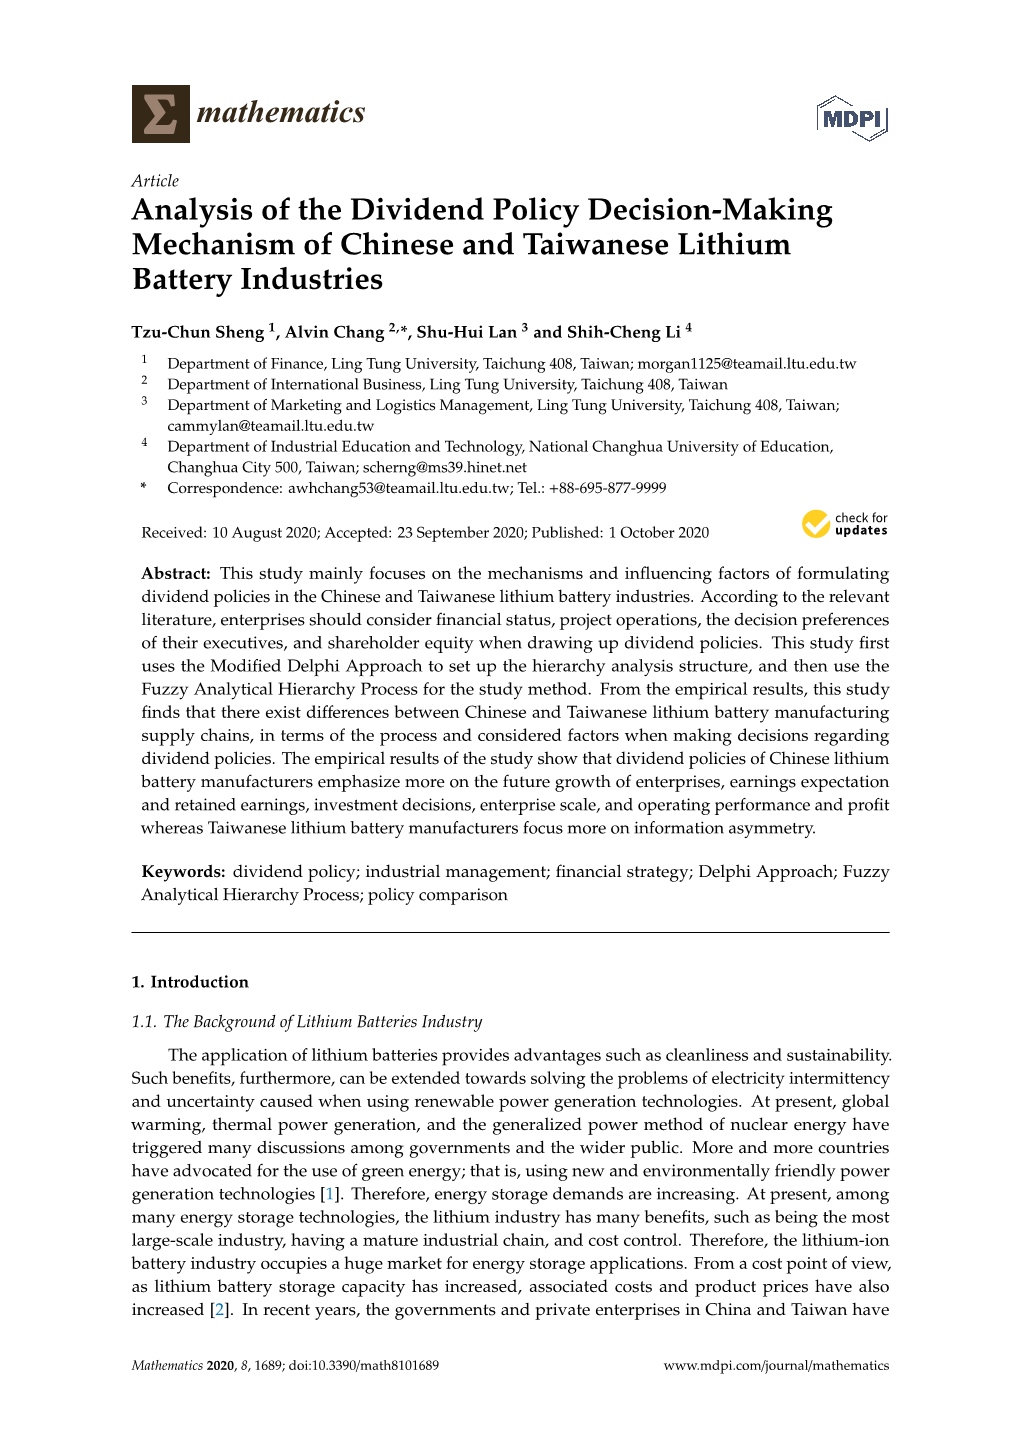 Analysis of the Dividend Policy Decision-Making Mechanism of Chinese and Taiwanese Lithium Battery Industries